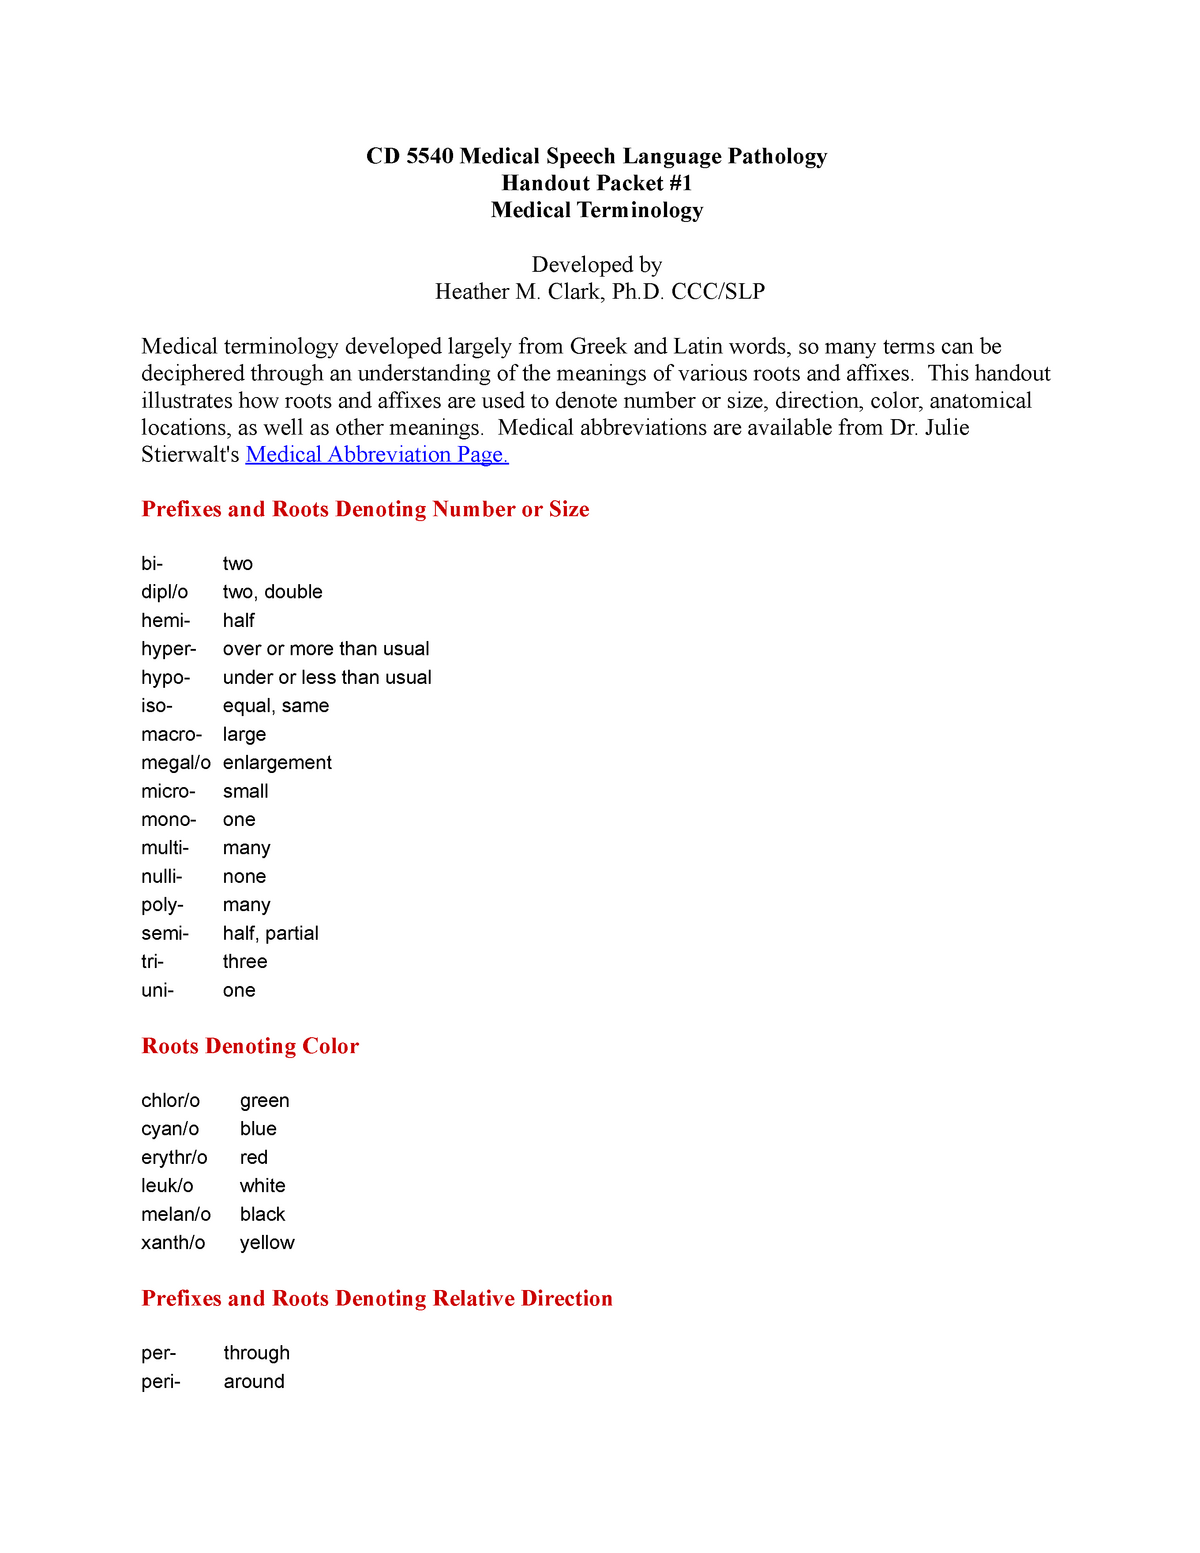 Med terms - Lecture notes 21-21 - CD 55210 Medical Speech Language Within Medical Terminology Abbreviations Worksheet